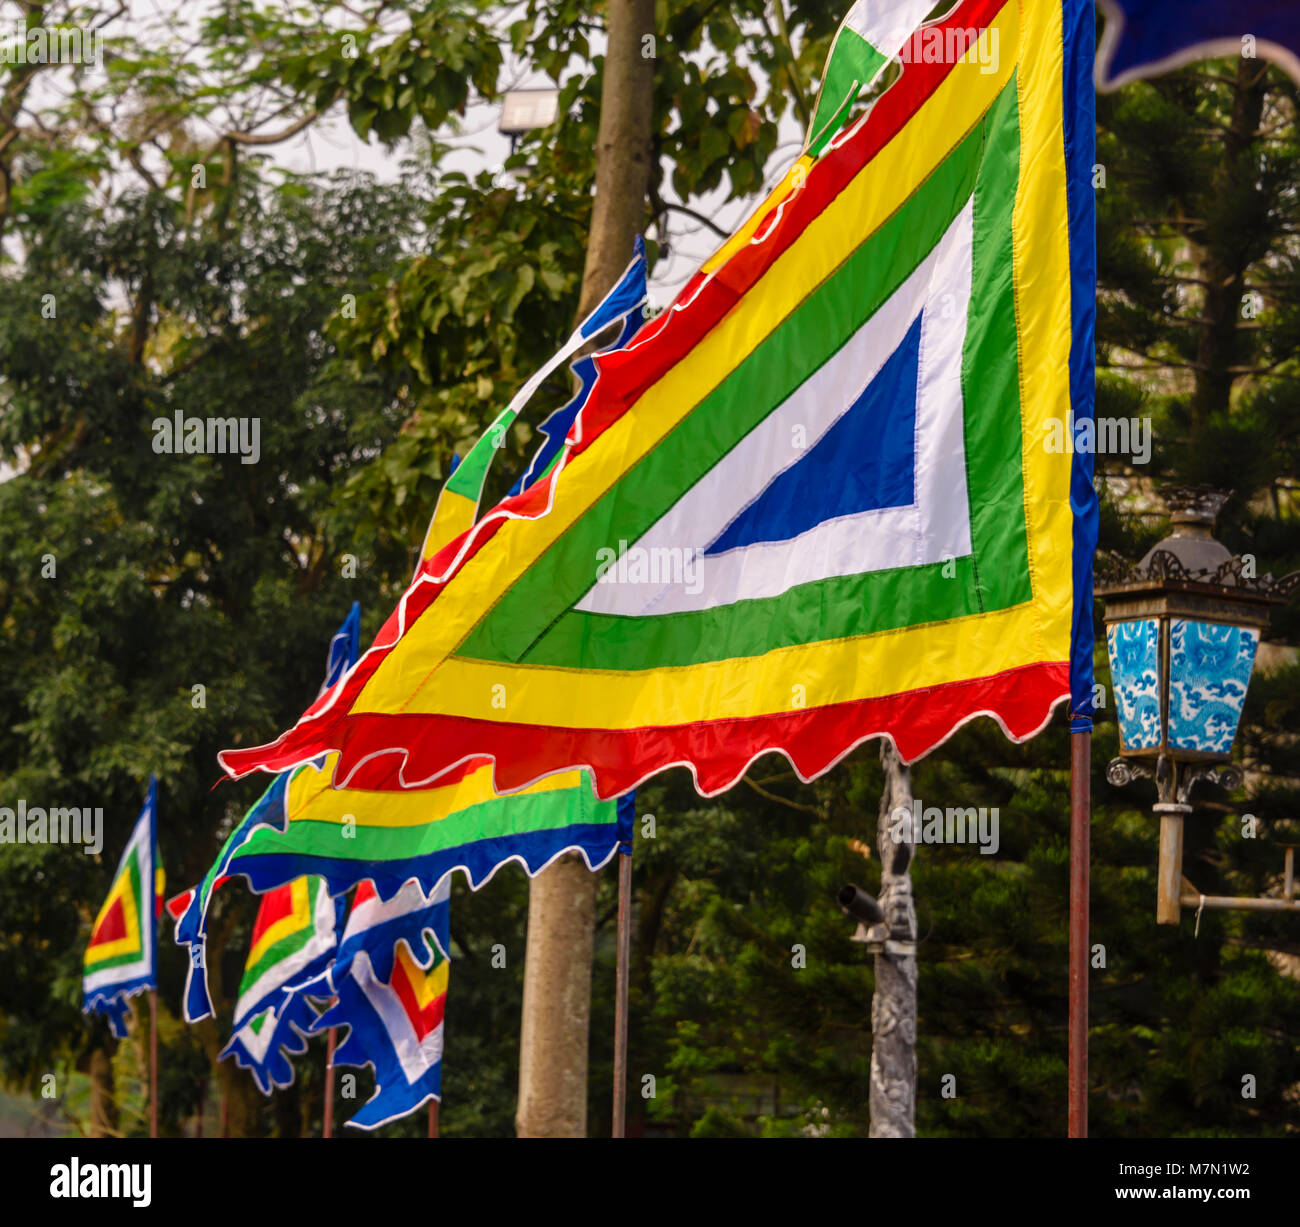 Multi-coloured trianguilar flags flying in Hue, Vietnam. Stock Photo